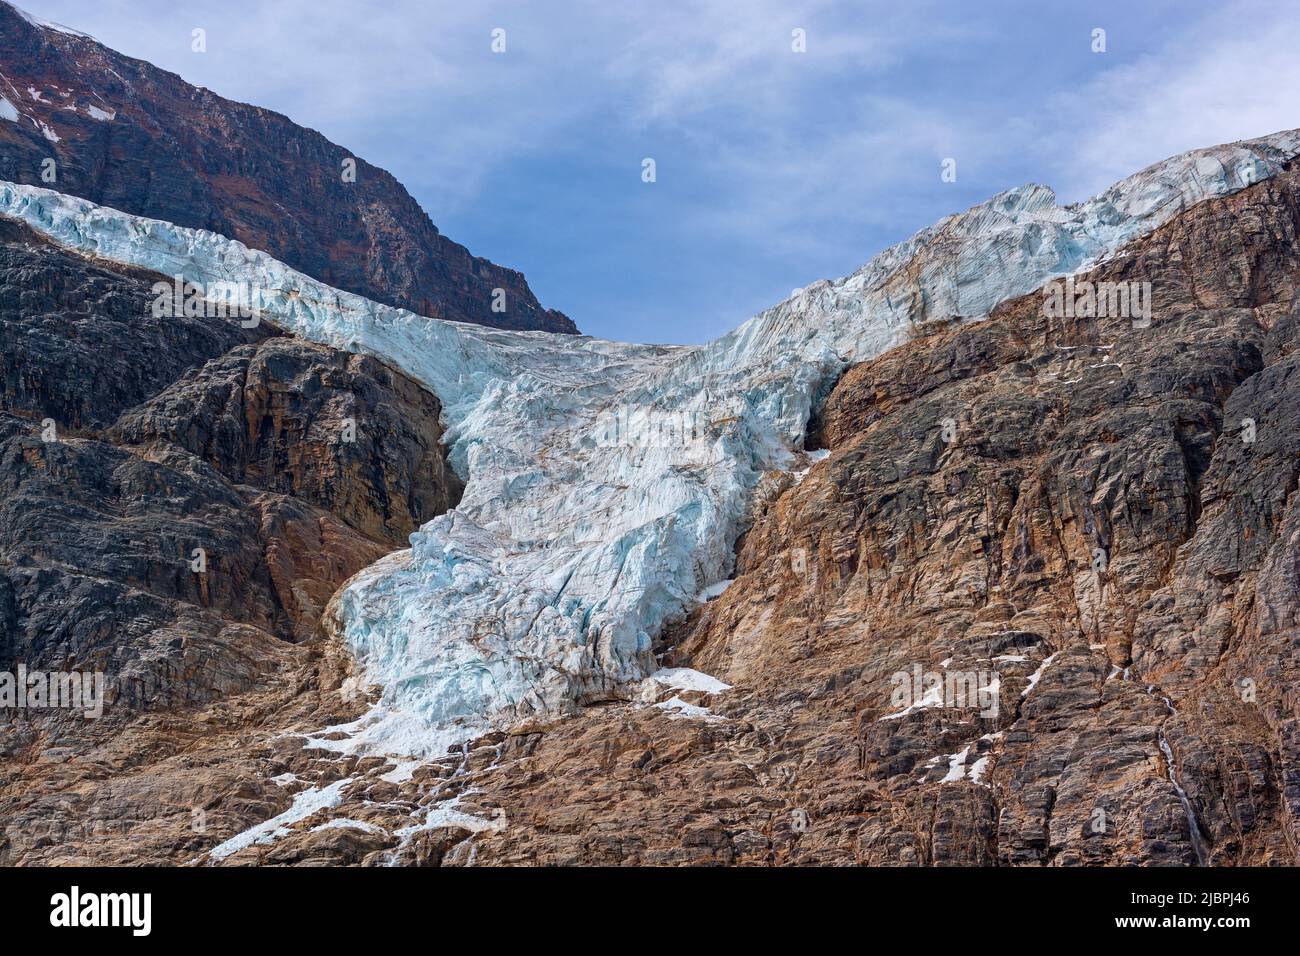 A Hanging Angel Glacier Falling Off the Mountain Slopes of Mount Edith Cavell in the Canadian Rockies in Jasper National park in Alberta Stock Photo